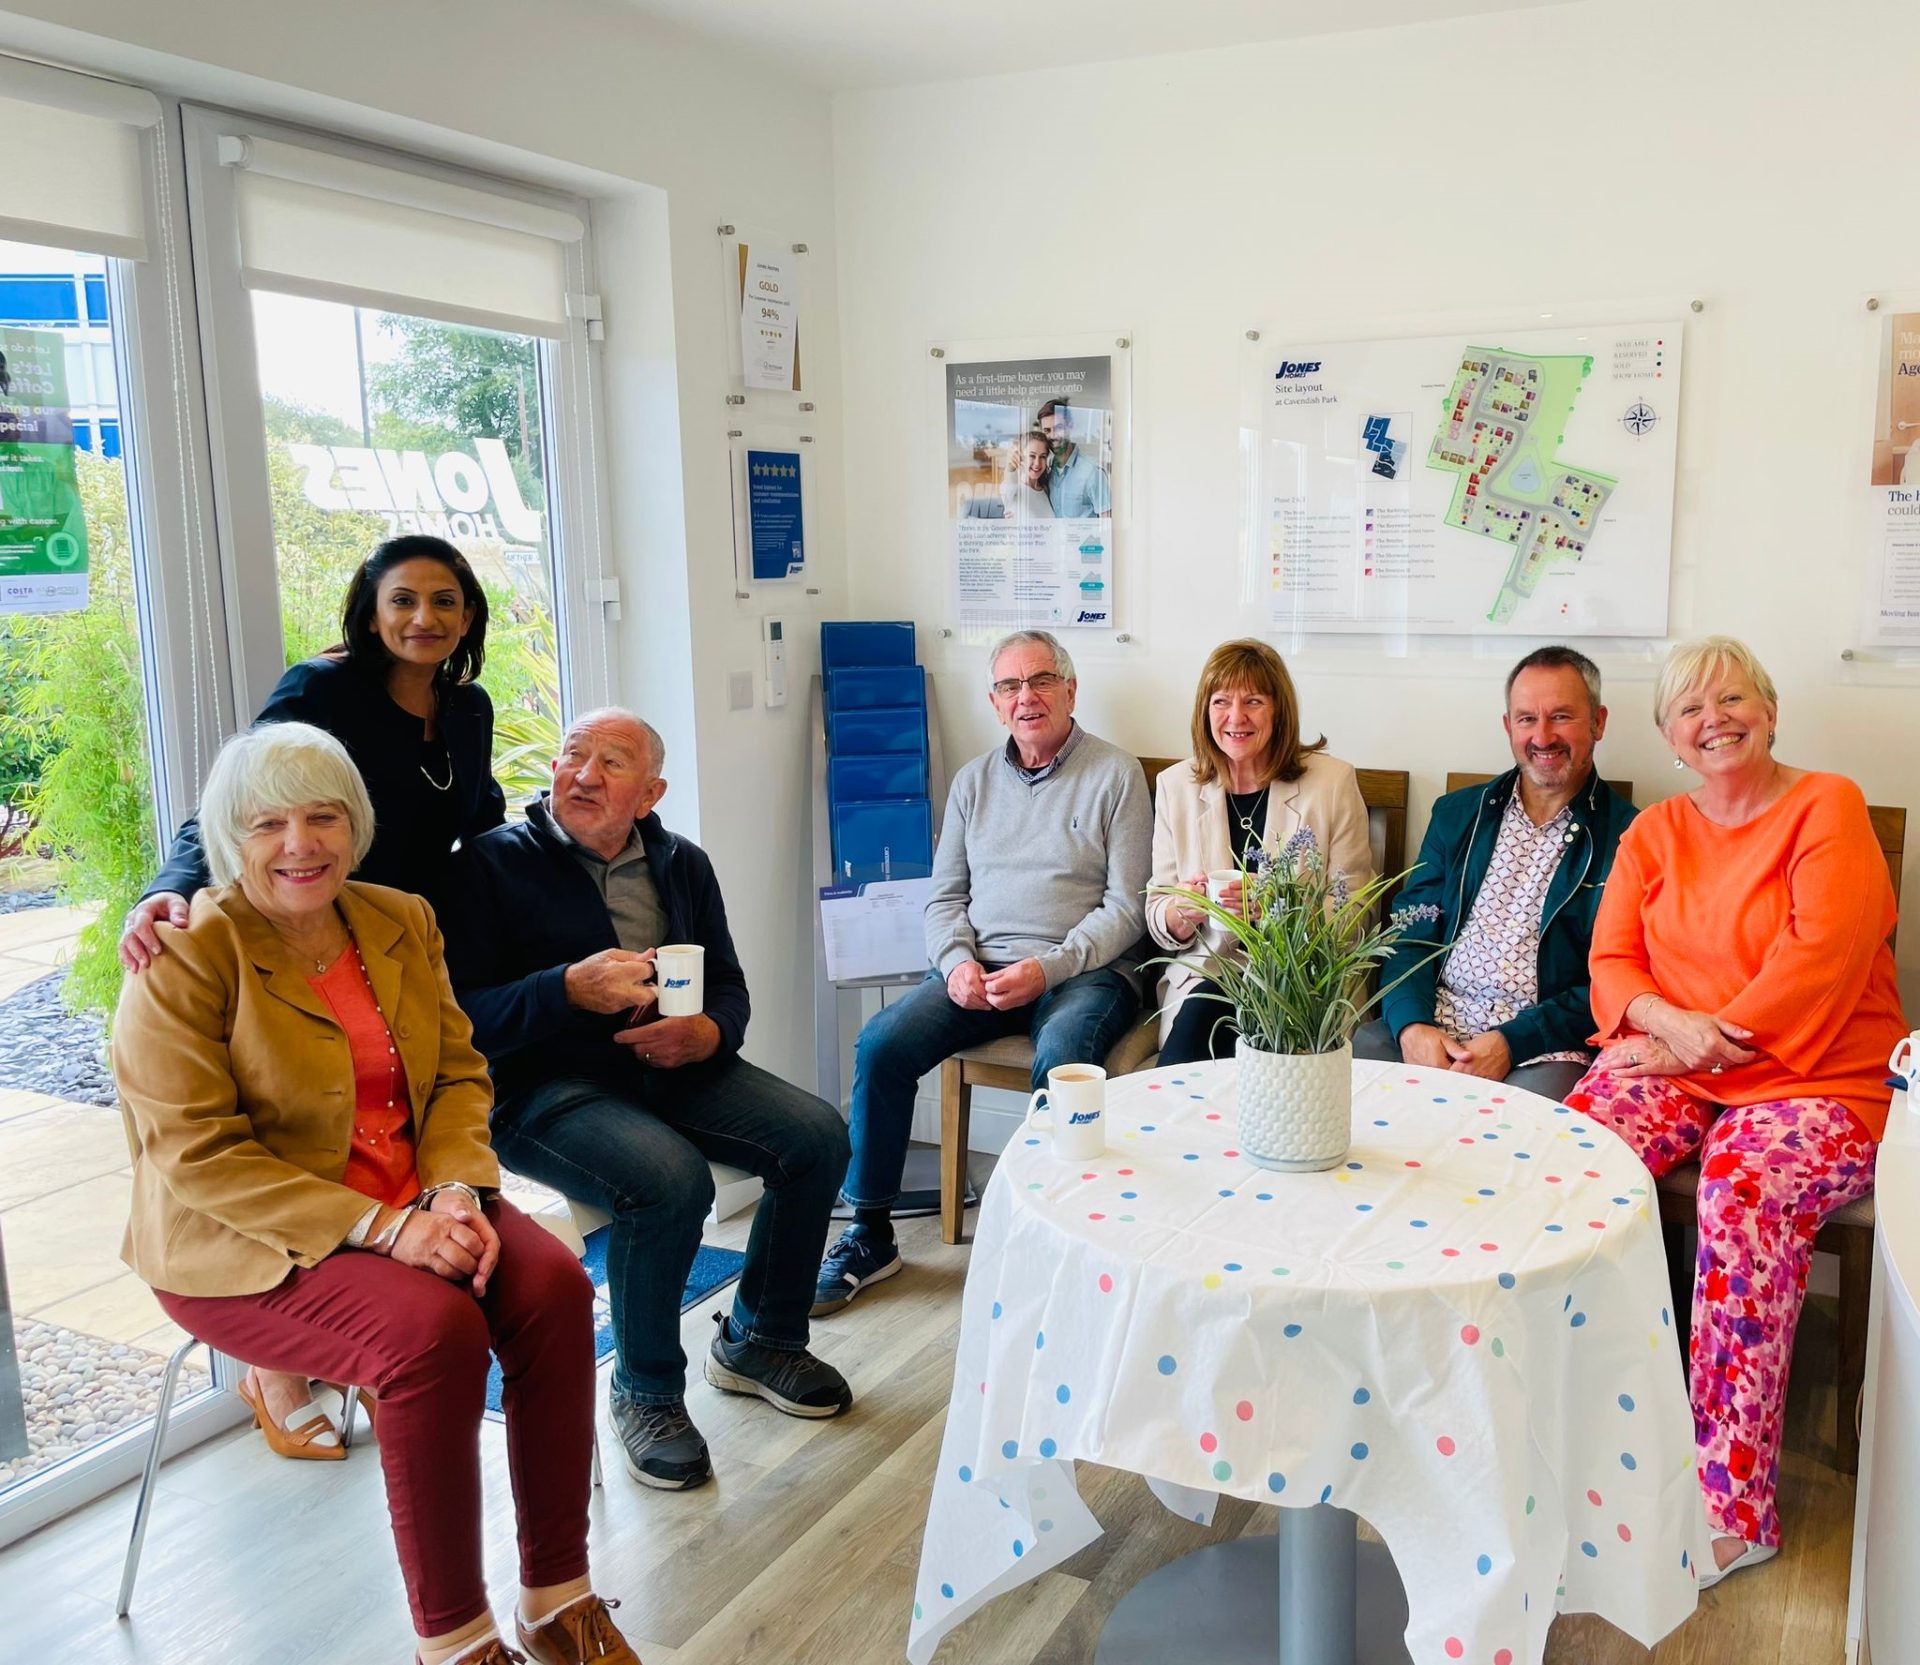 Jones Homes hosts coffee mornings to raise money for Macmillan Cancer Support